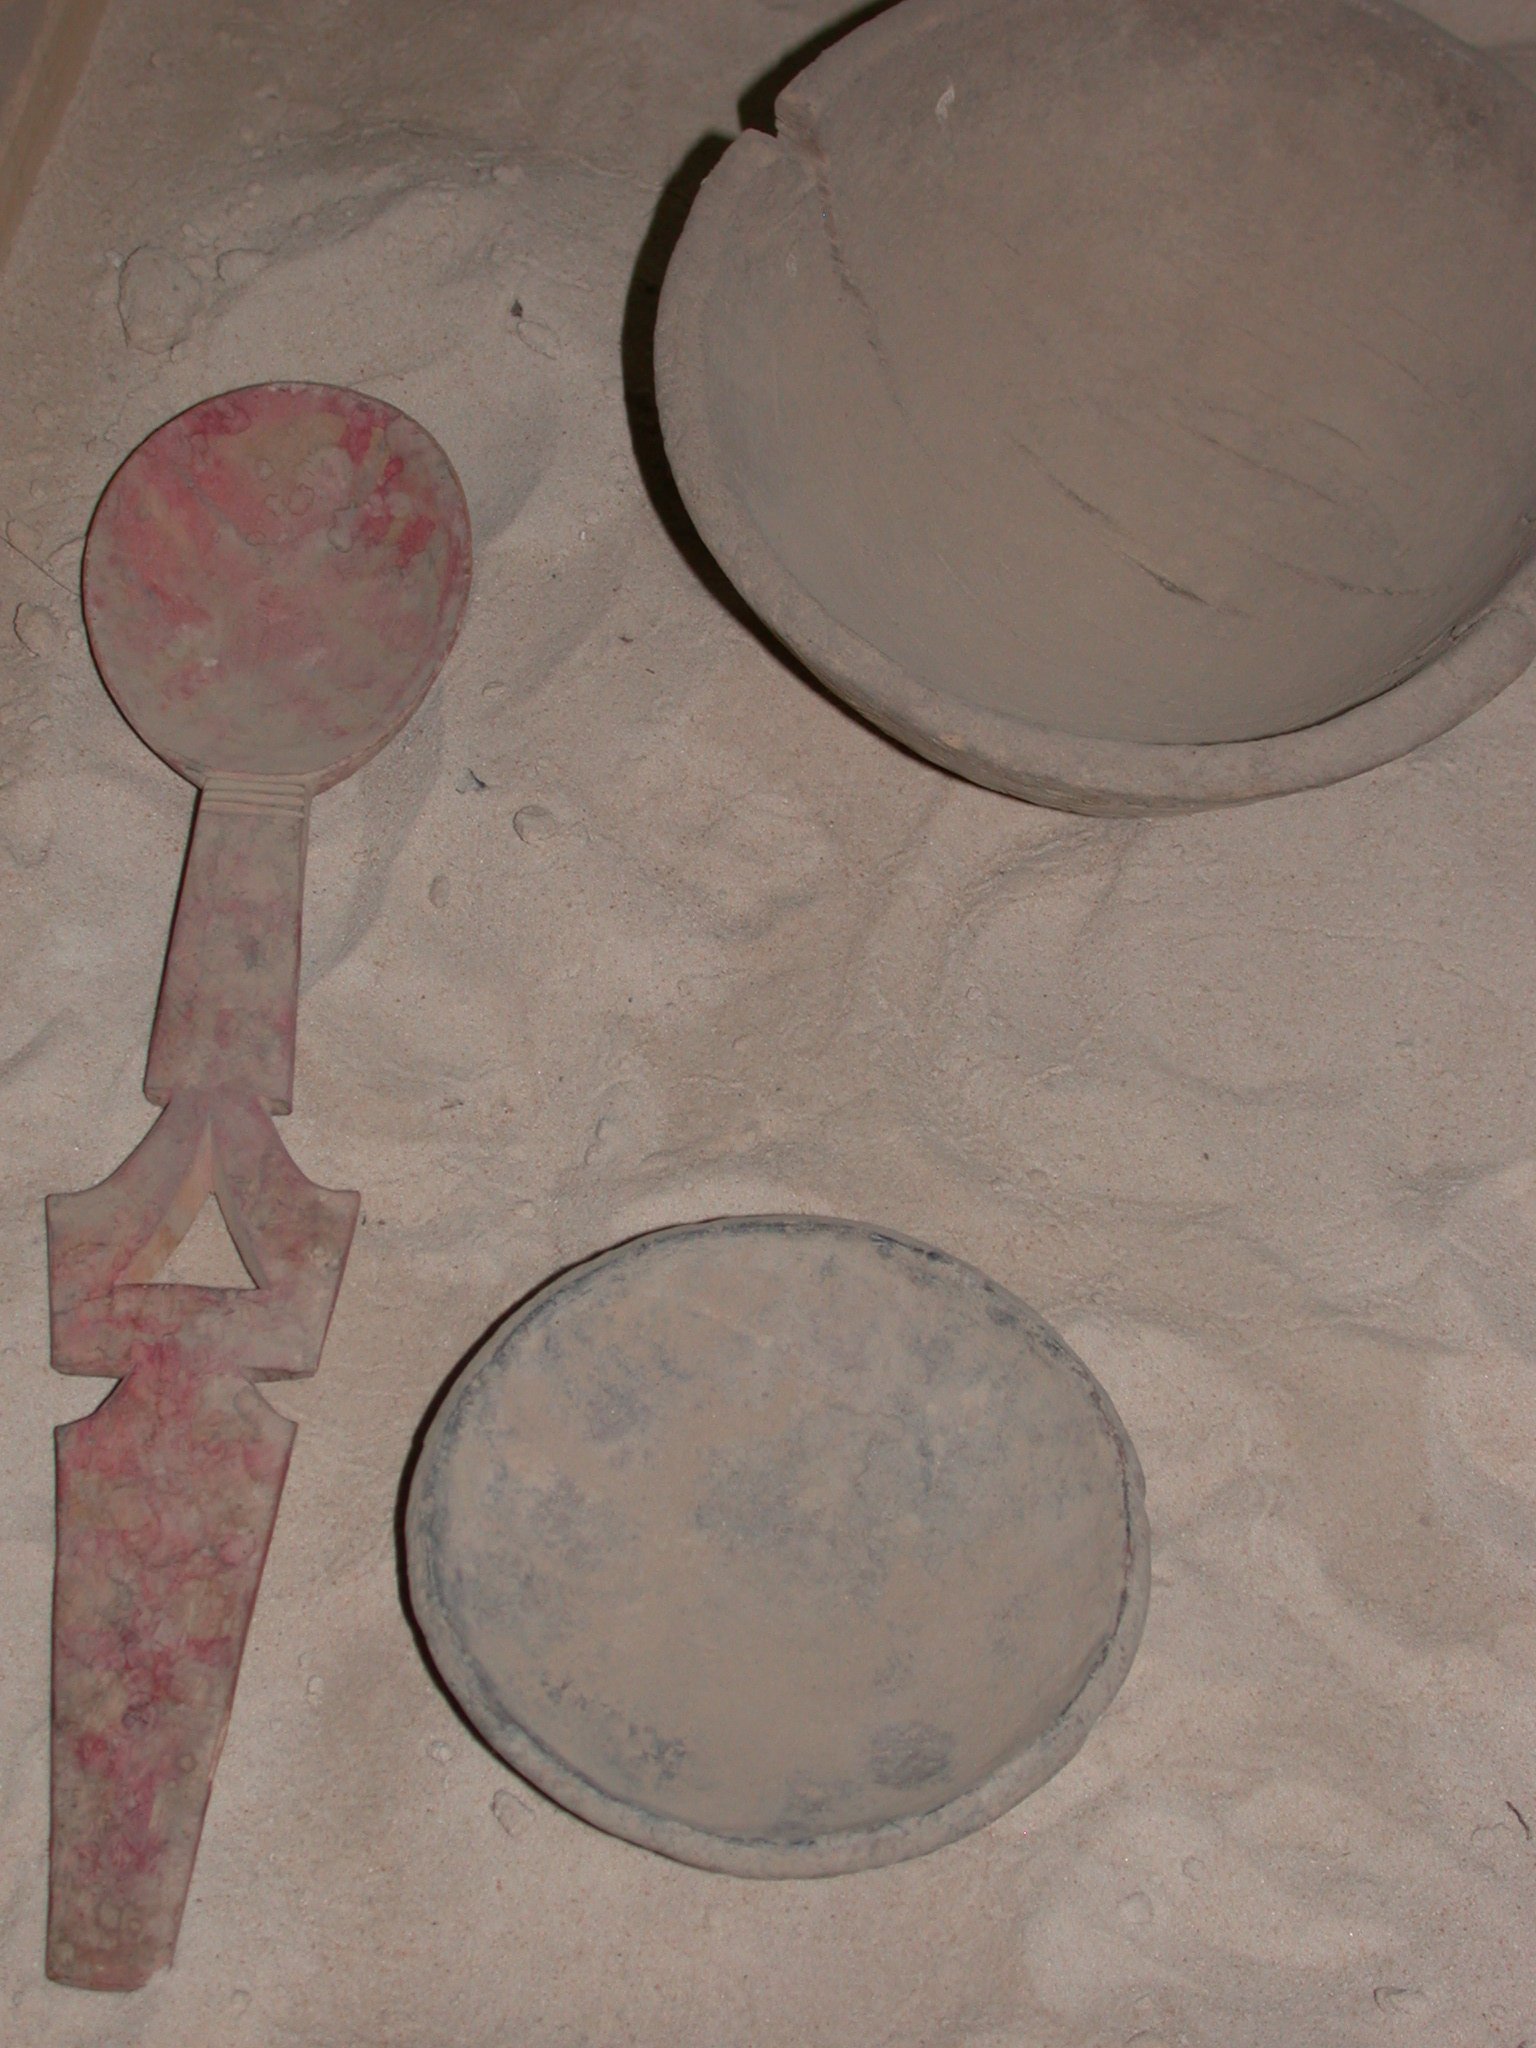 Wooden Carved Spoon, Plate, Bowl, Timbuktu Ethnological Museum, Timbuktu, Mali